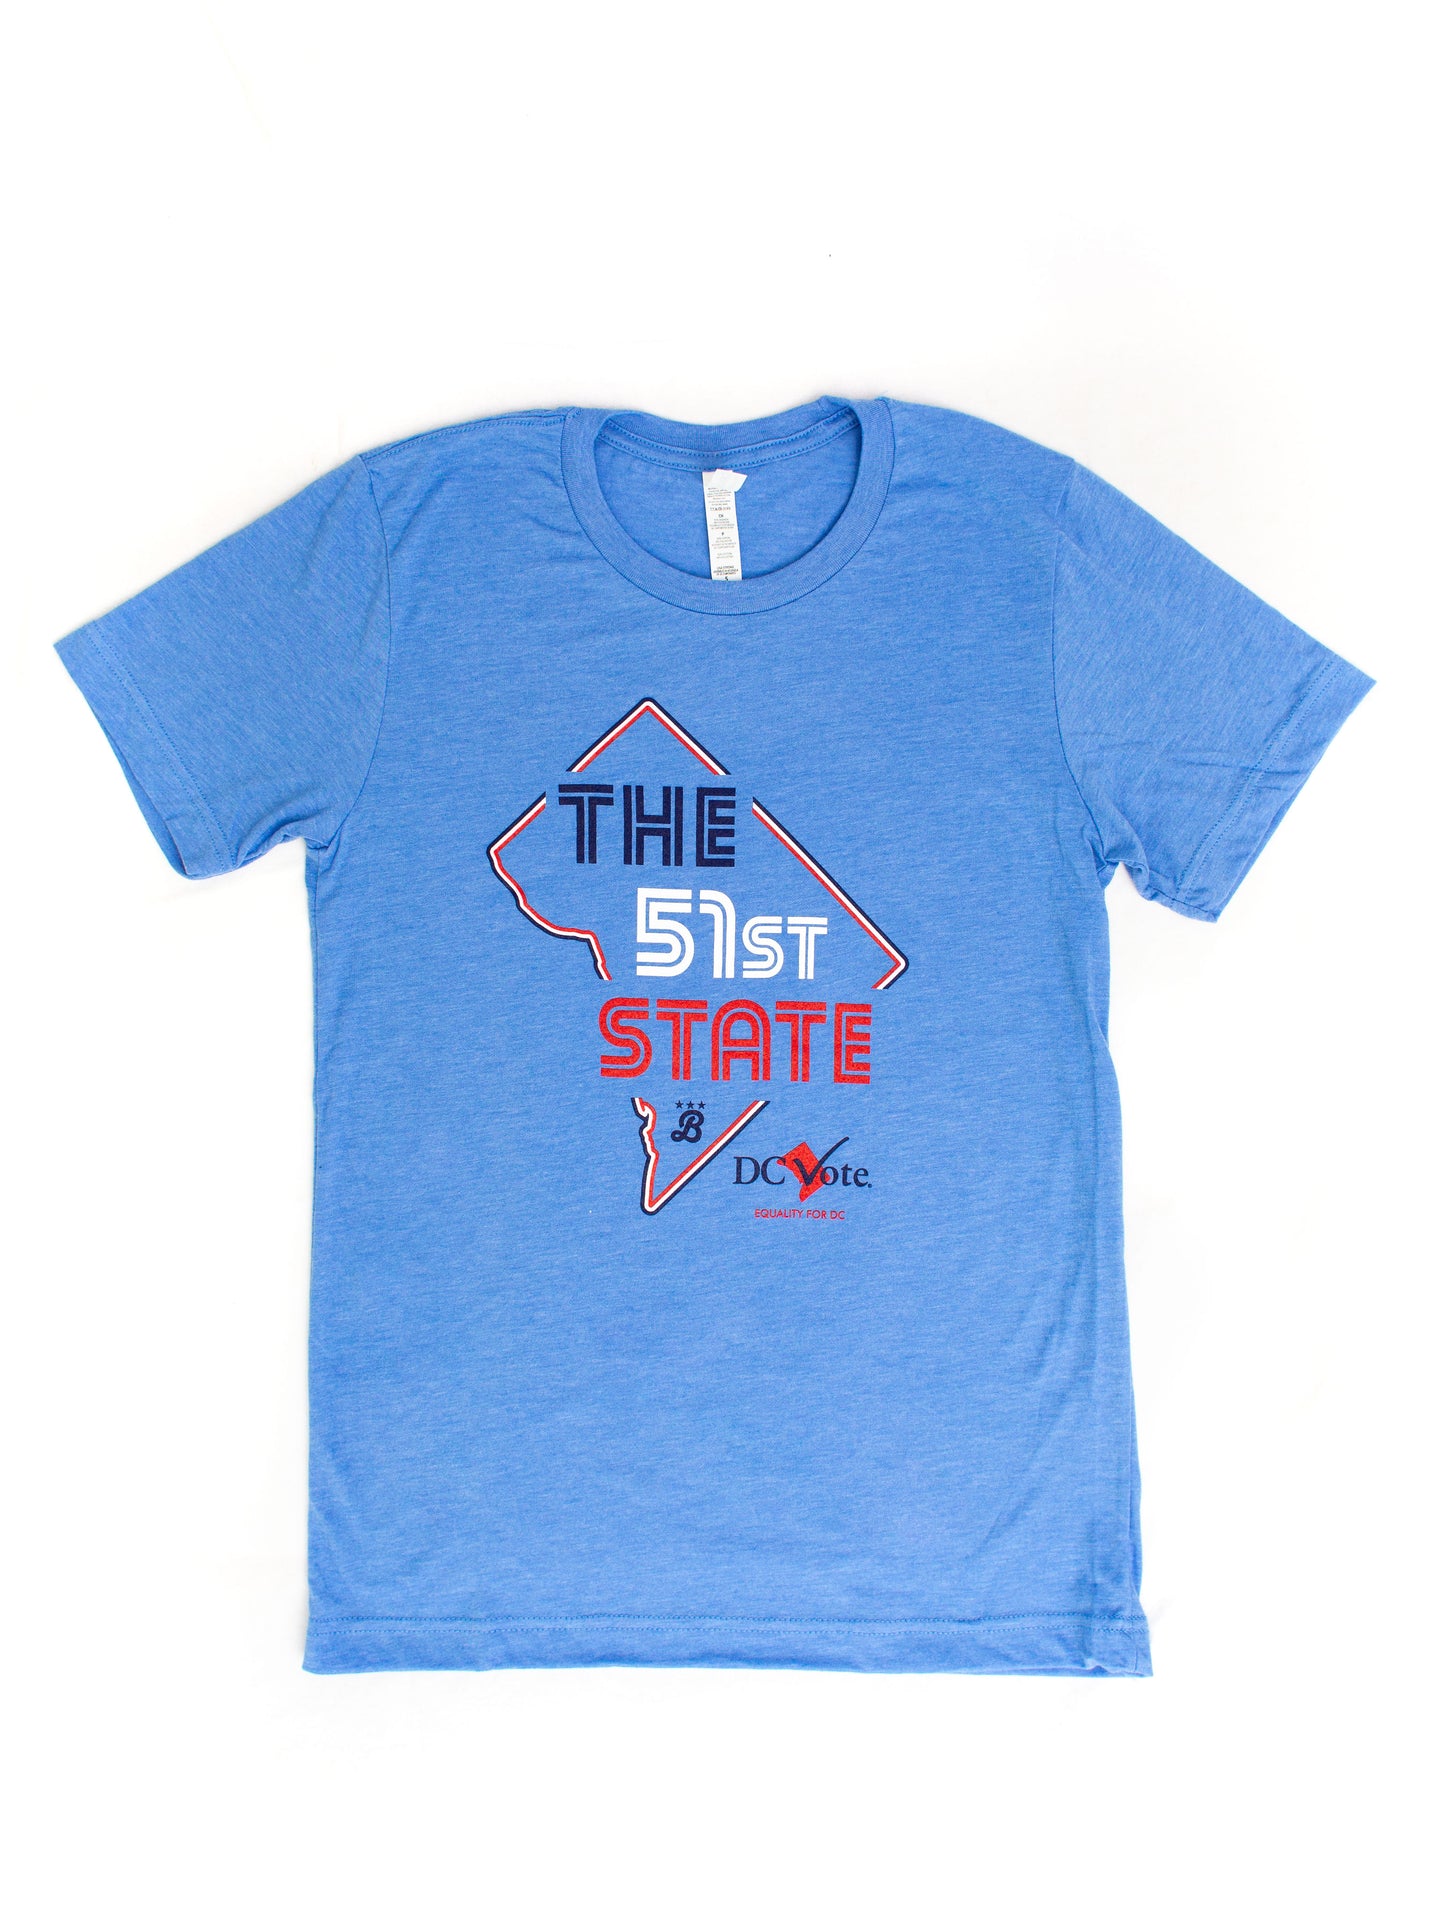 Unisex The 51st State T-shirt